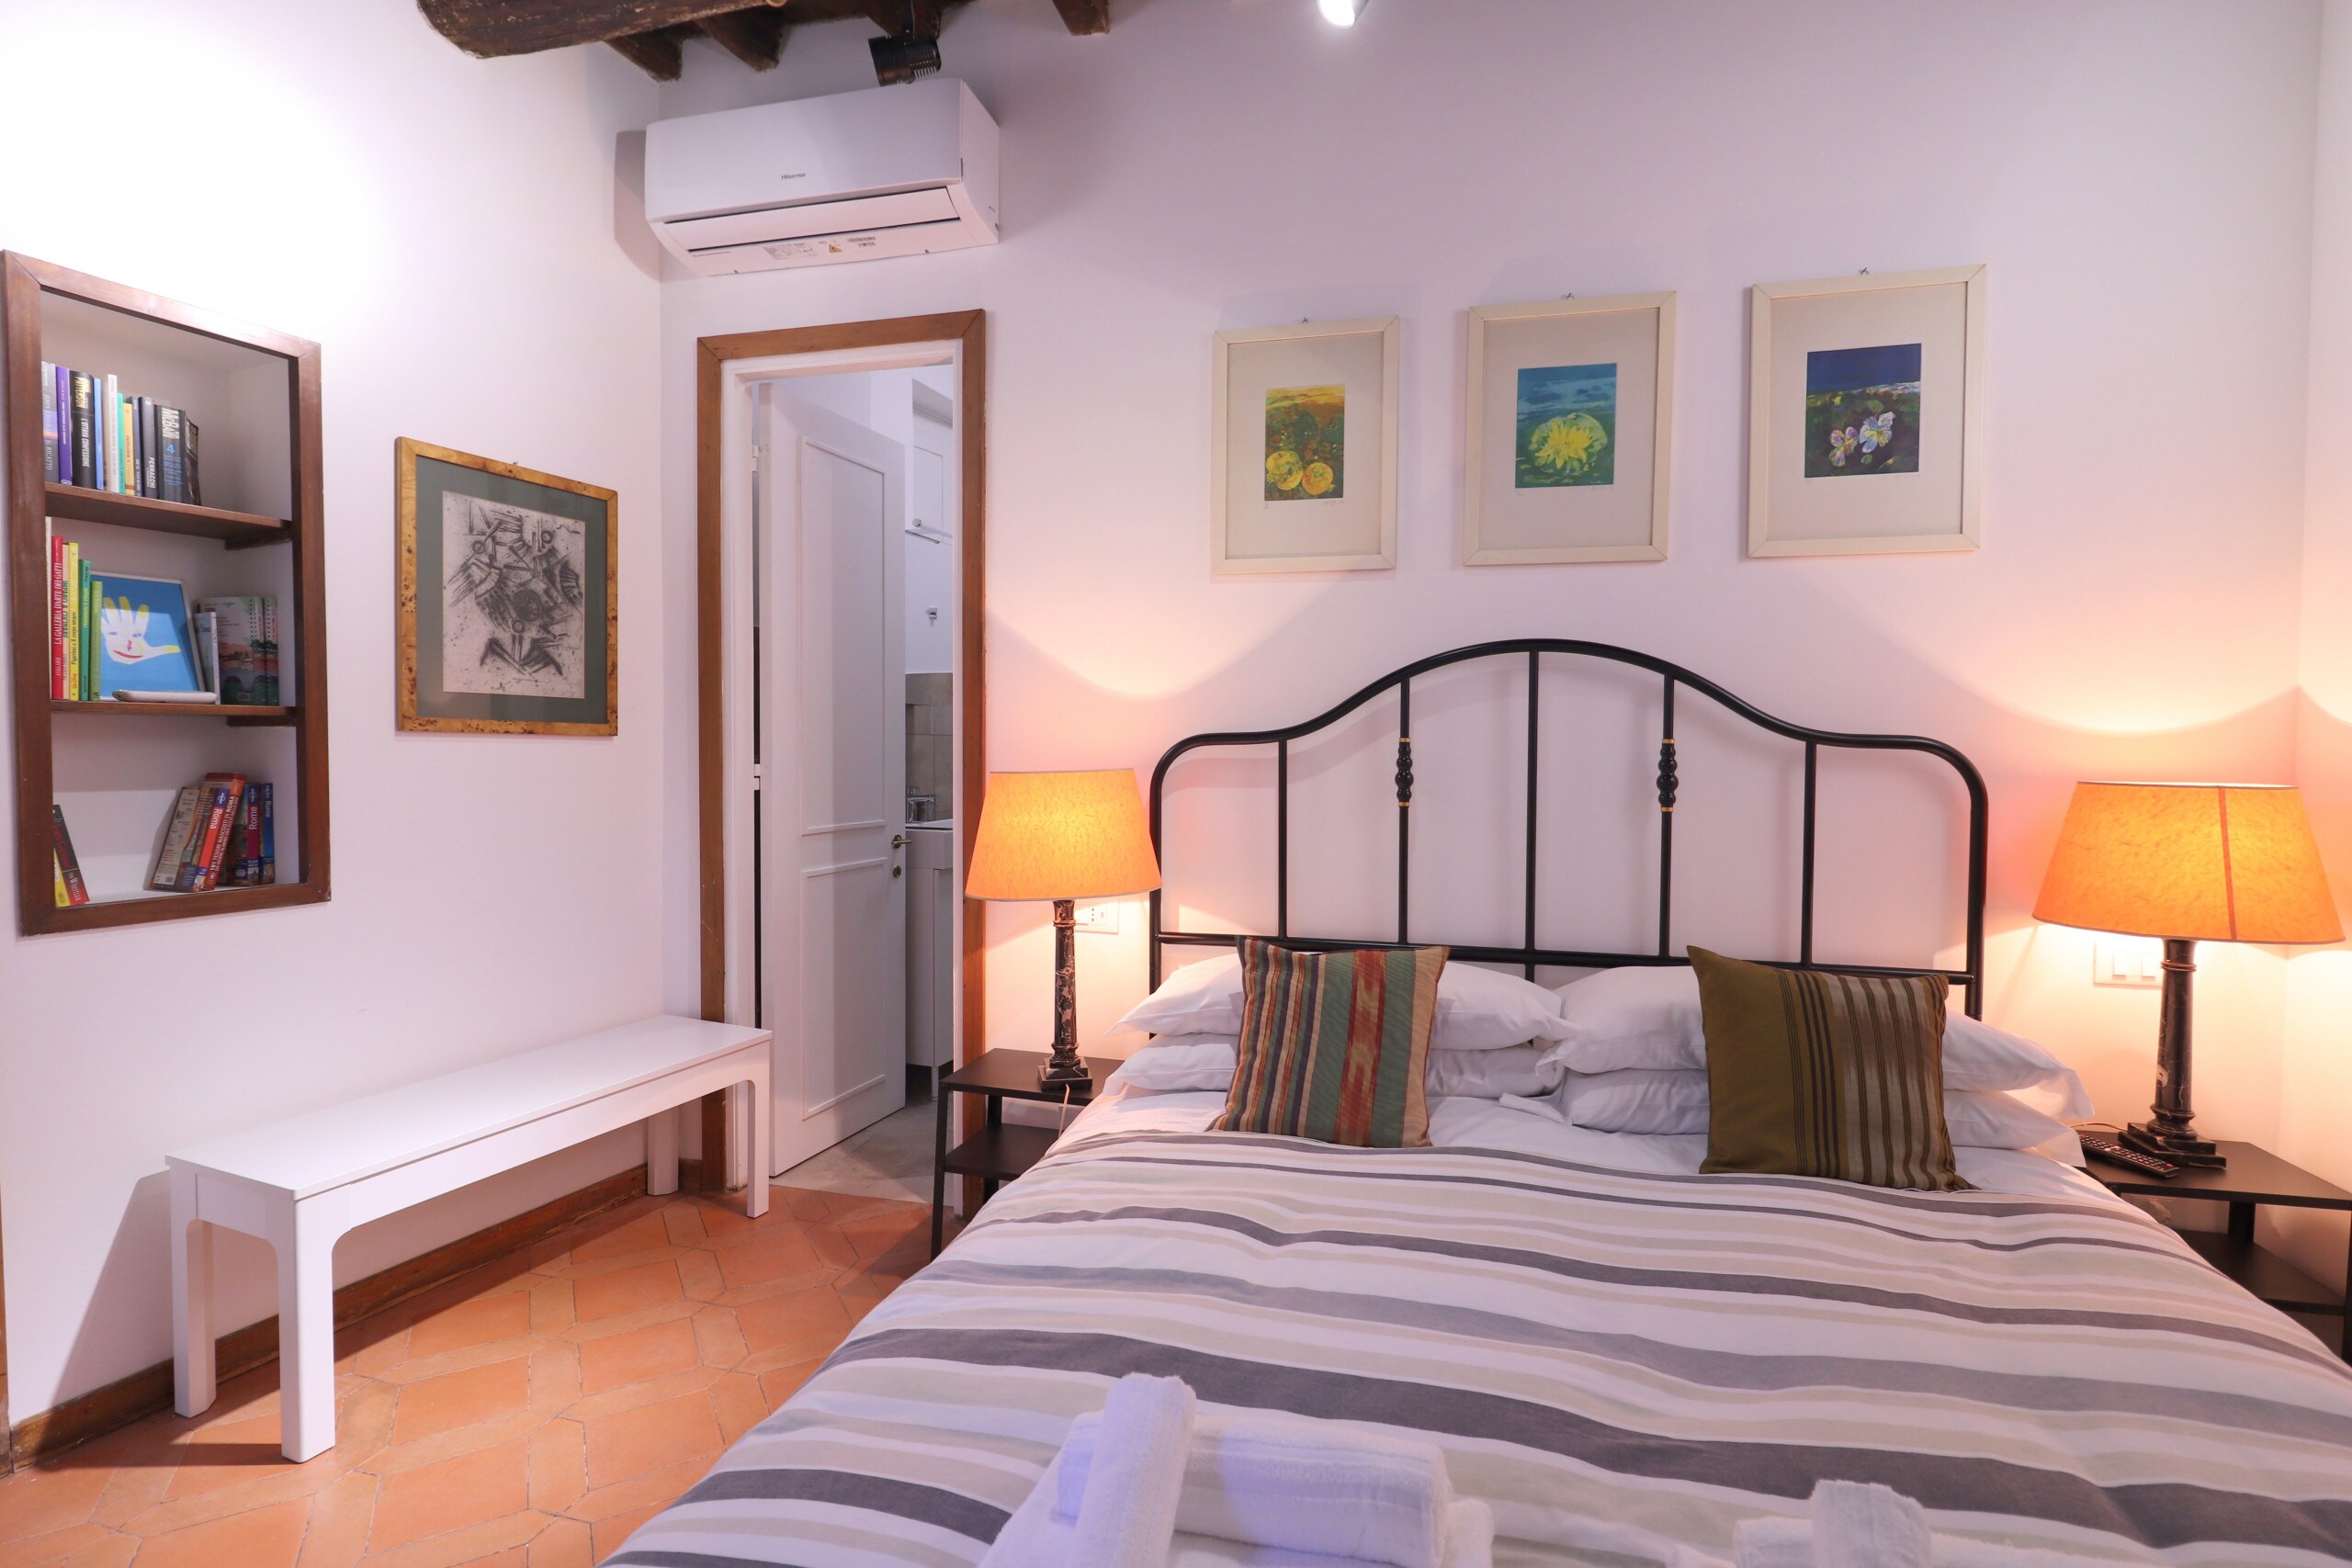 Property Image 2 - Nice Cozy Abode in the heart of Colorful Piazza Navona